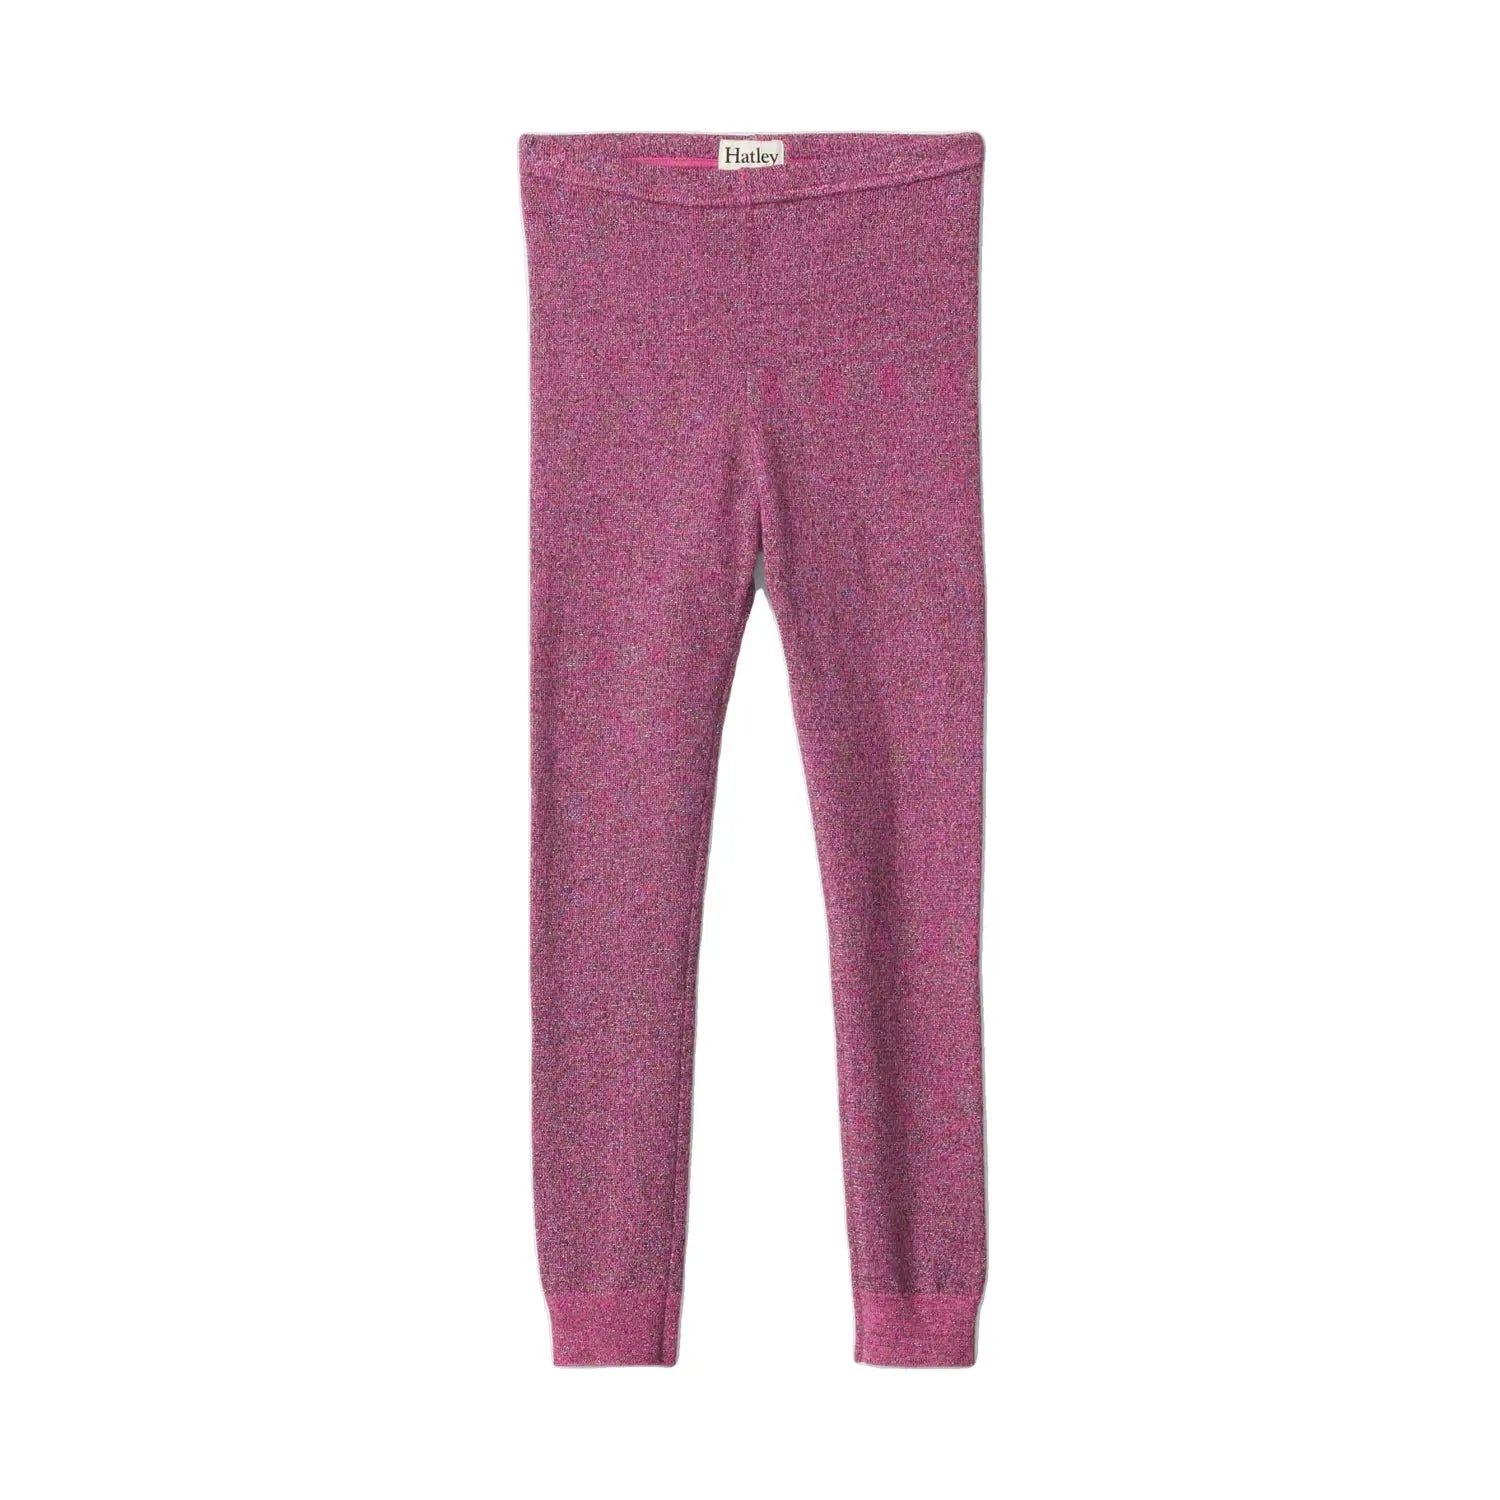 Hatley G's Pink Glitter Knit Leggings, Pink, front view 